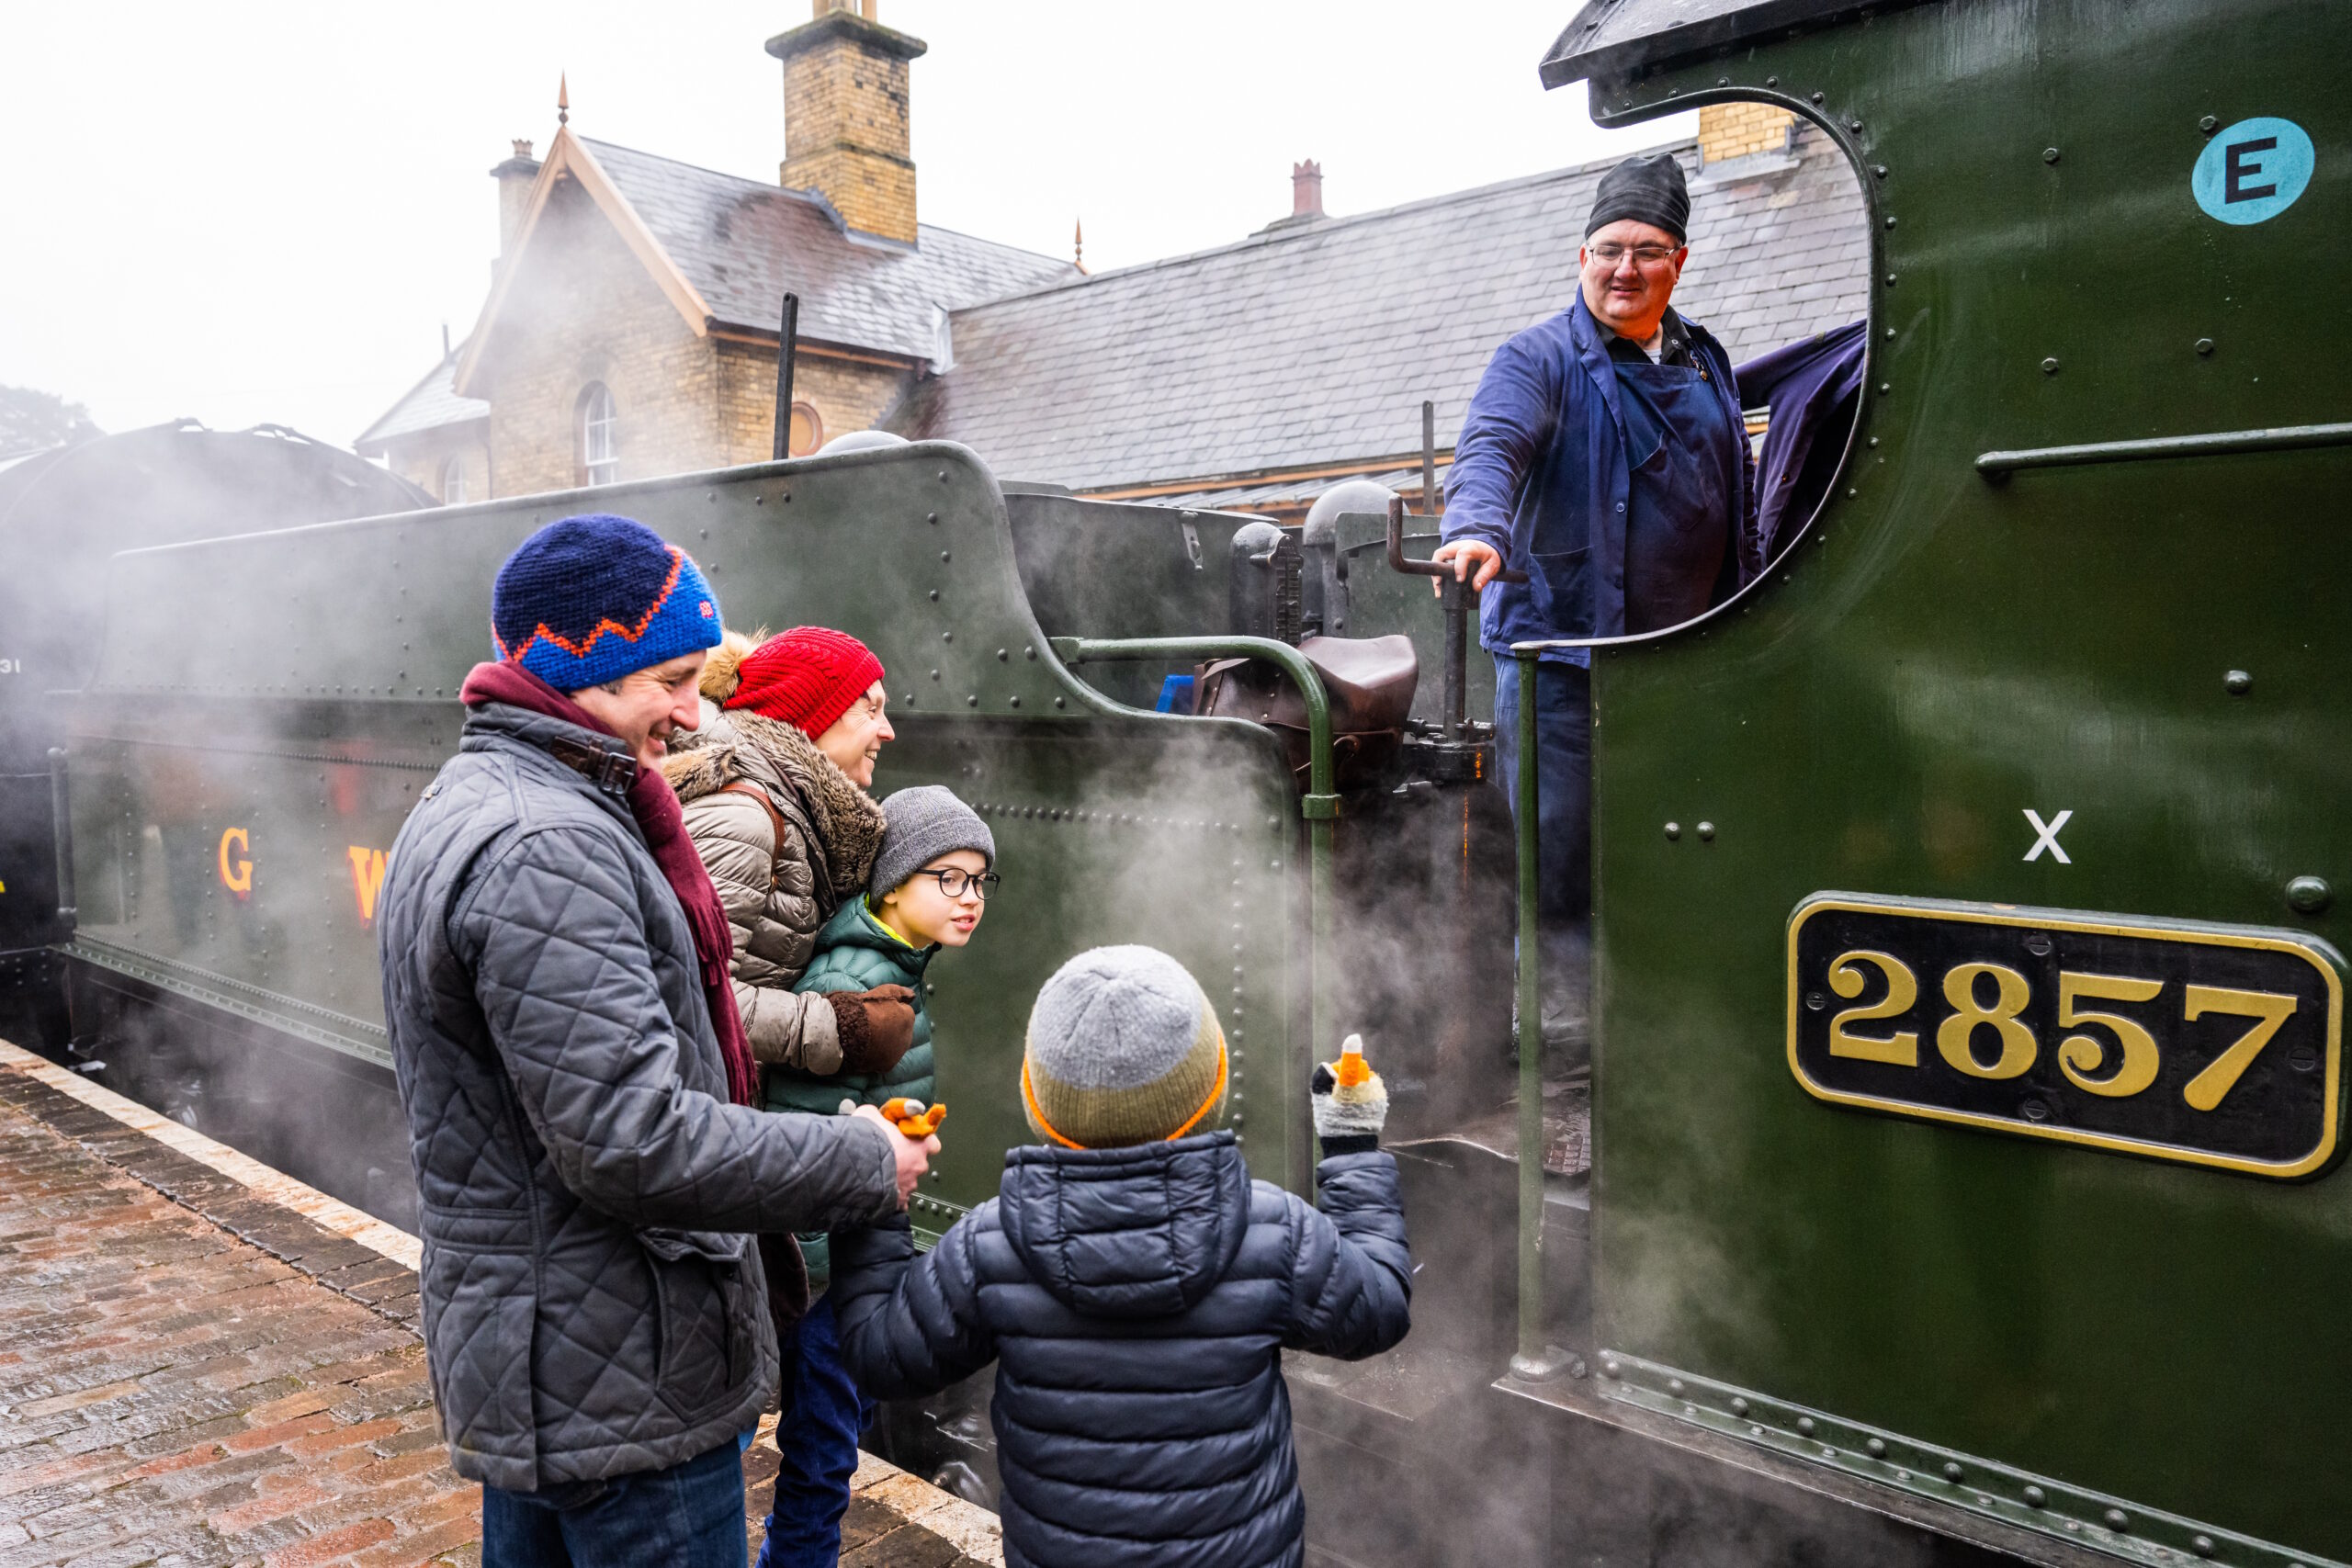 All aboard for Santa Trains on the Severn Valley Railway